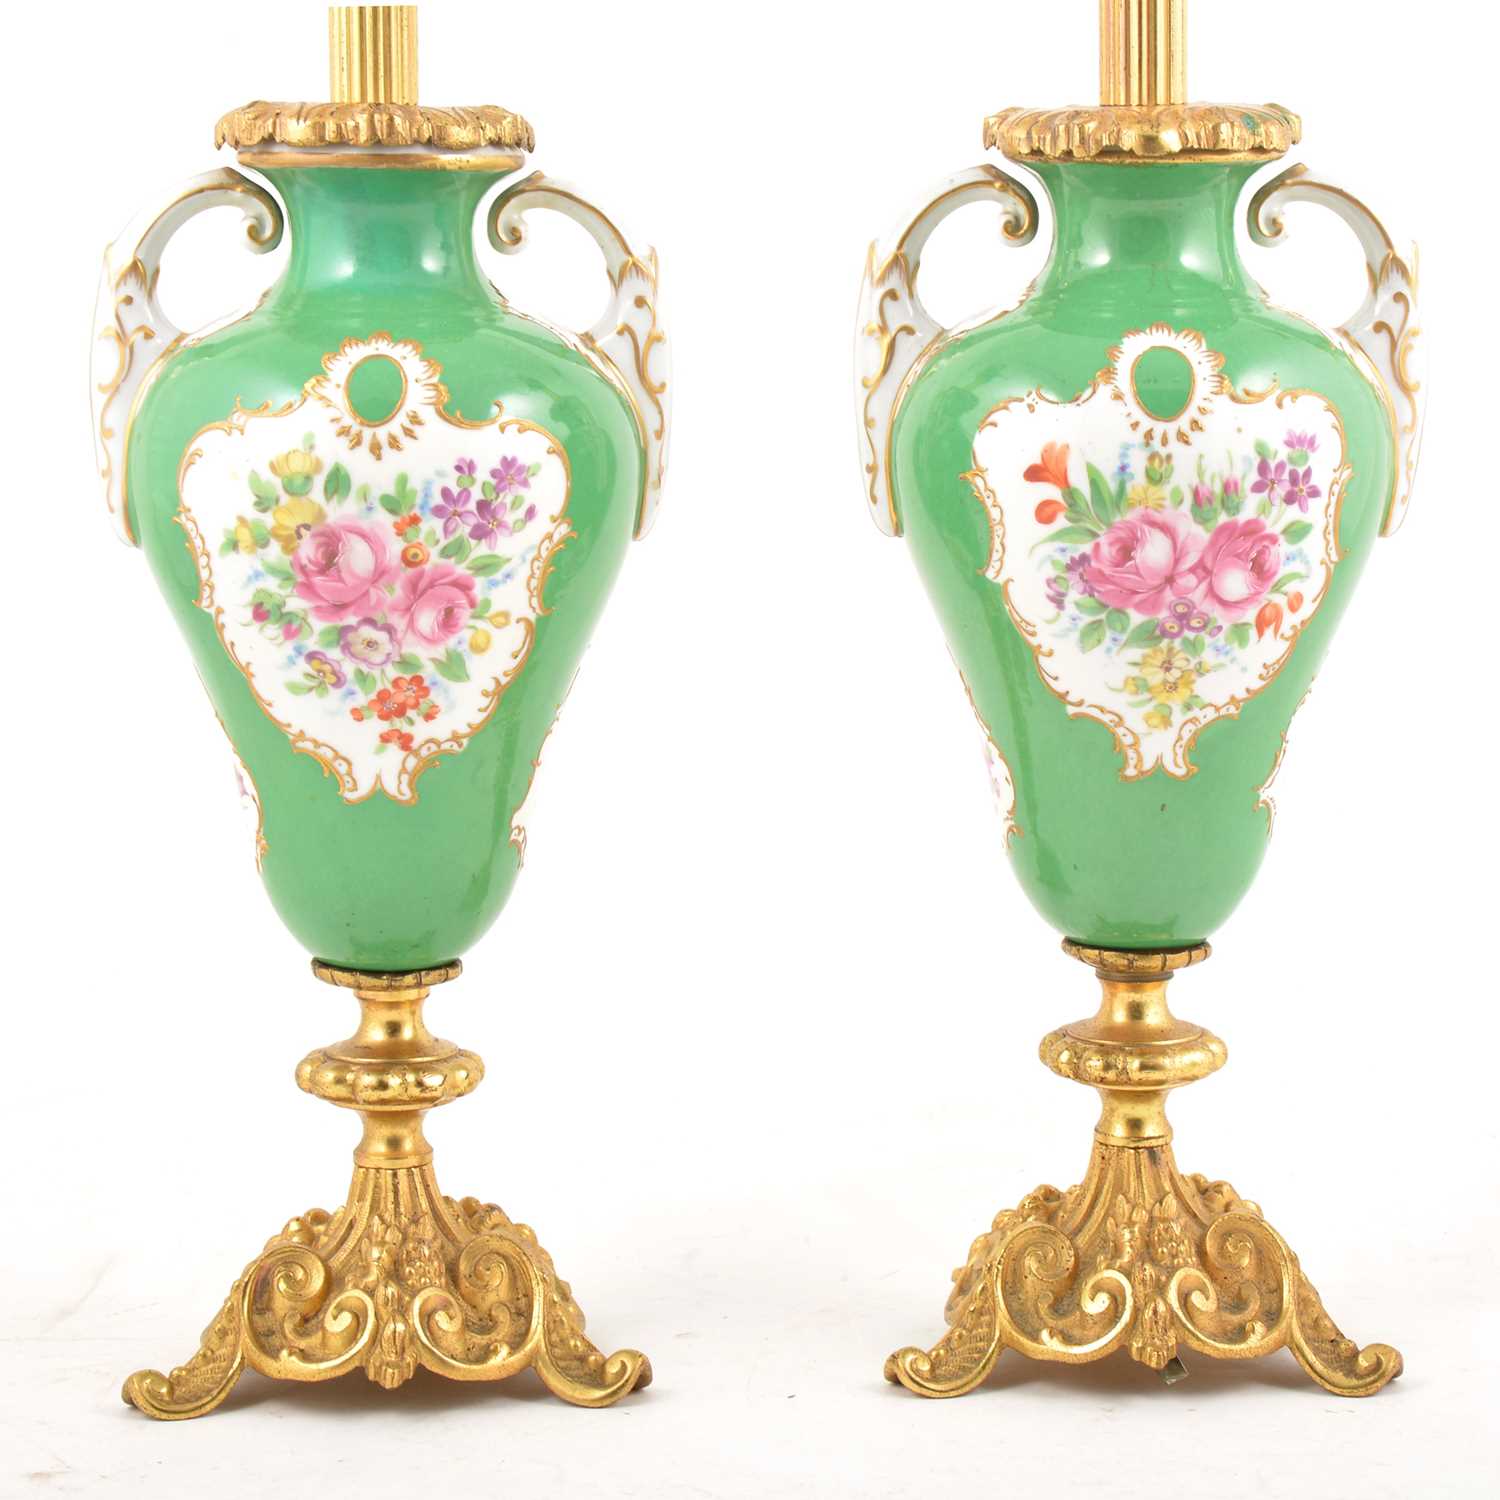 Lot 1 - Pair of French porcelain gilt metal mounted lamp bases.